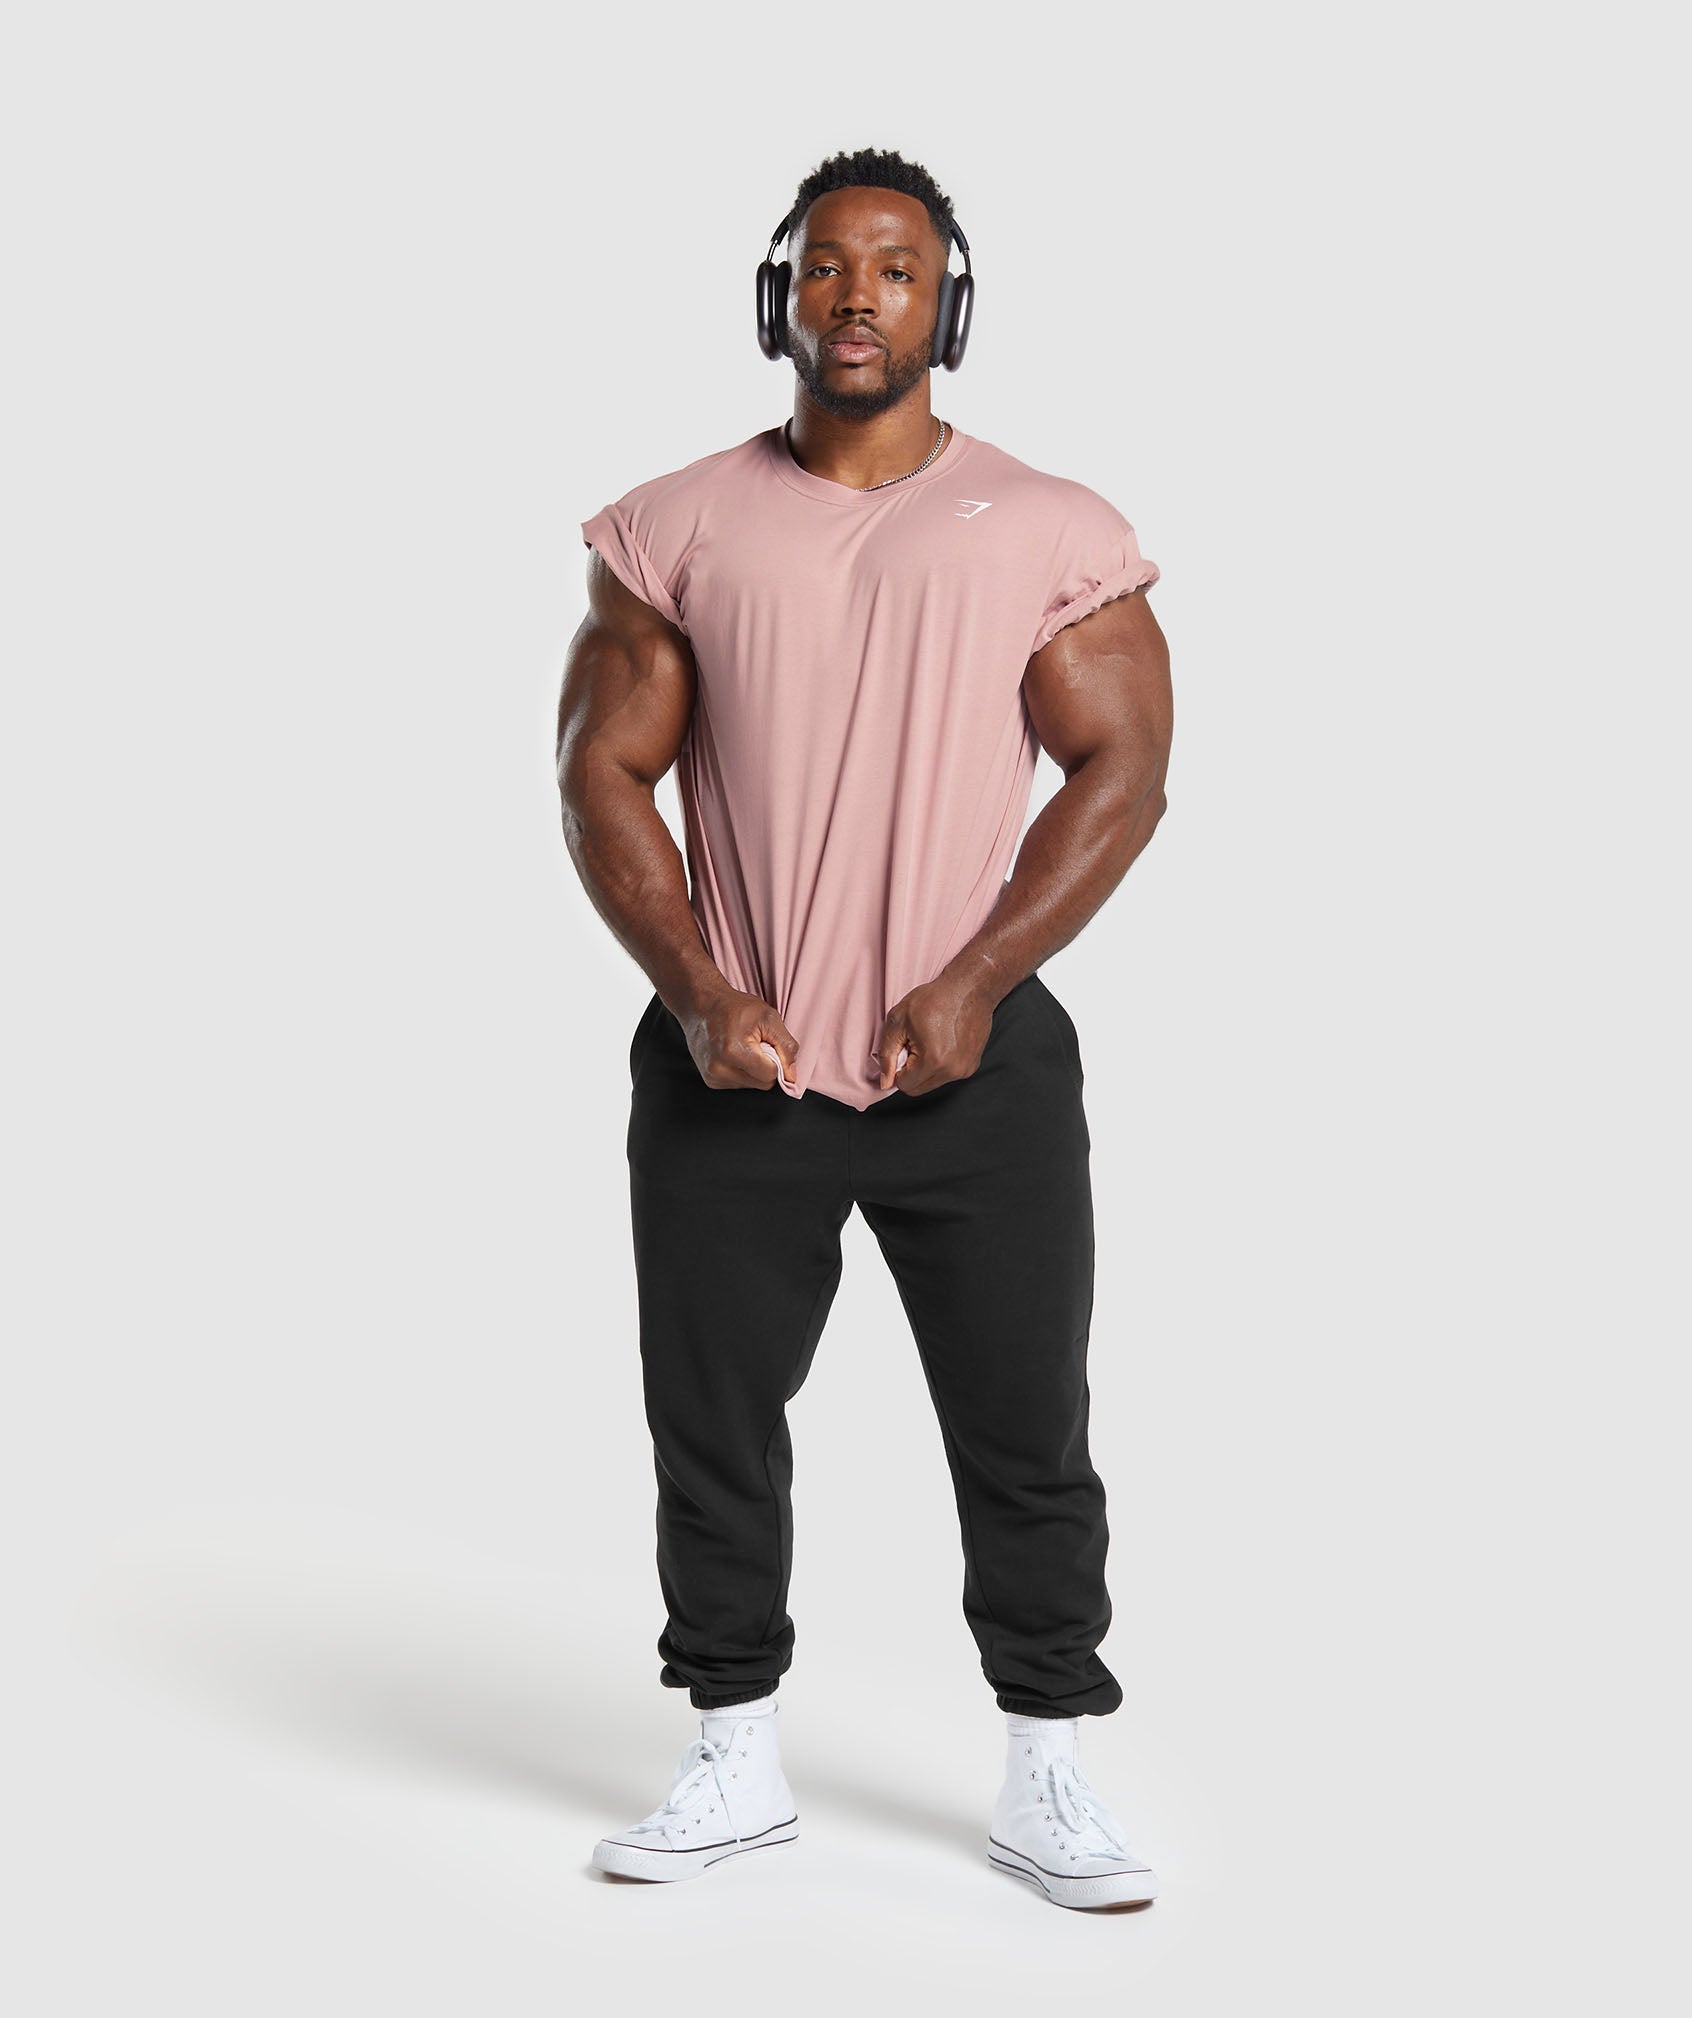 Power T-Shirt in Light Pink - view 4